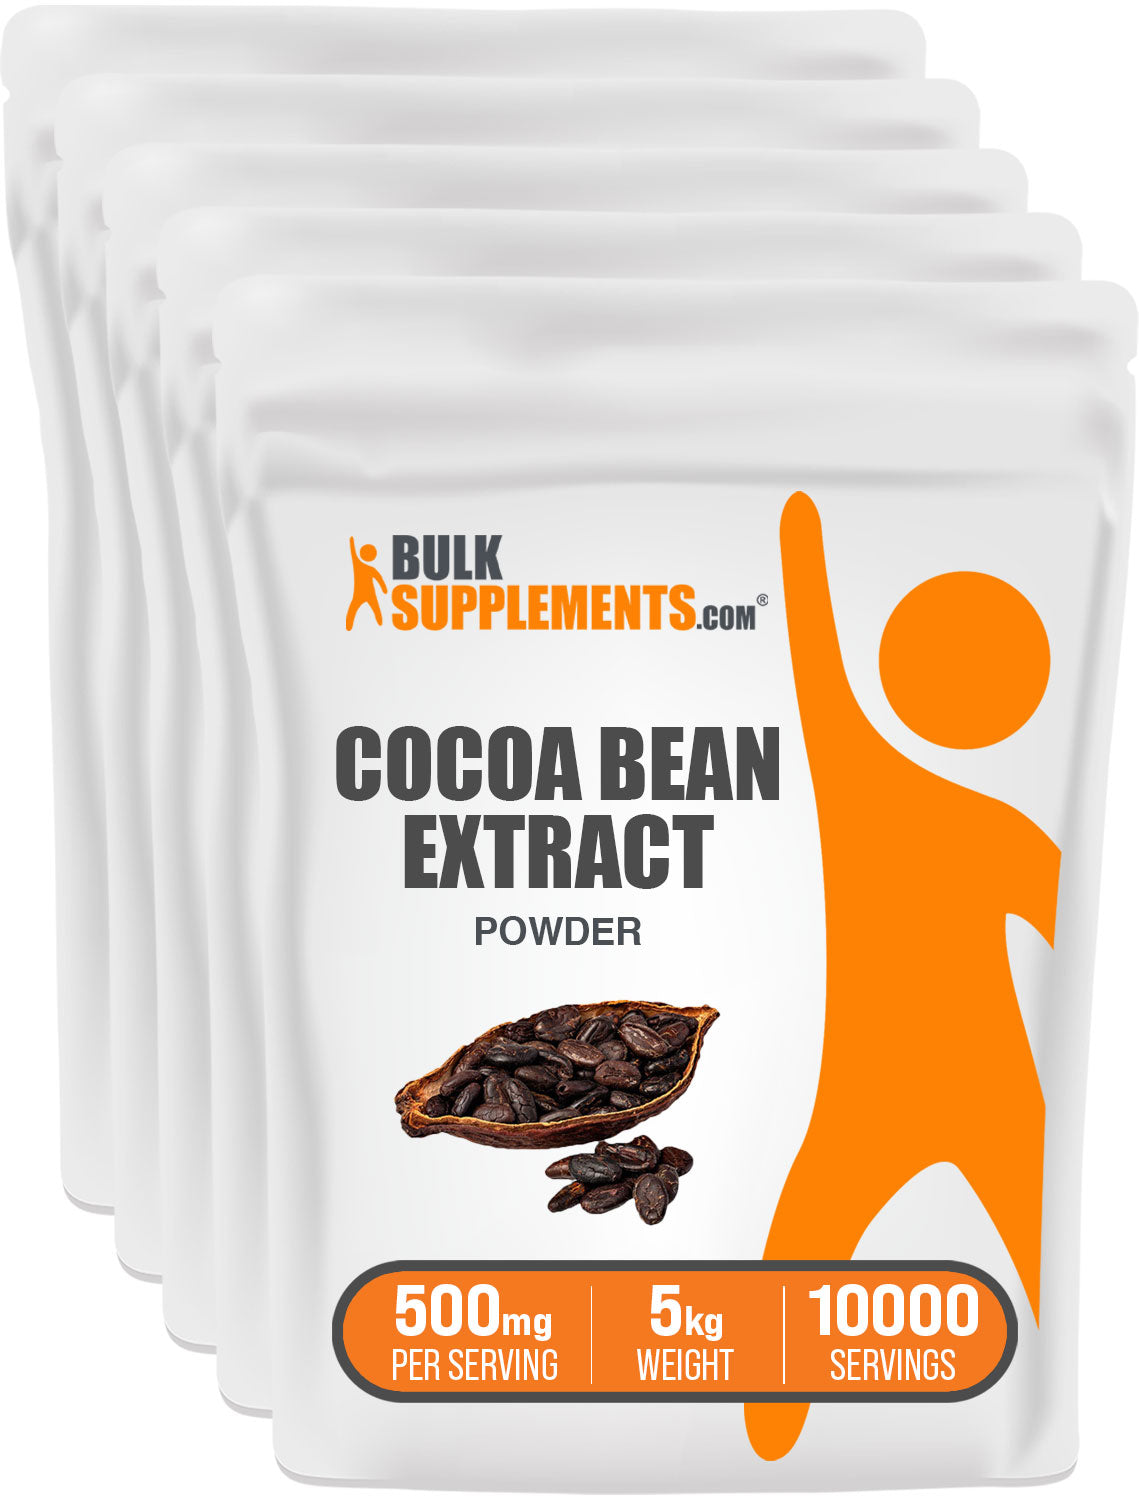 5kg bag of cocoa bean extract